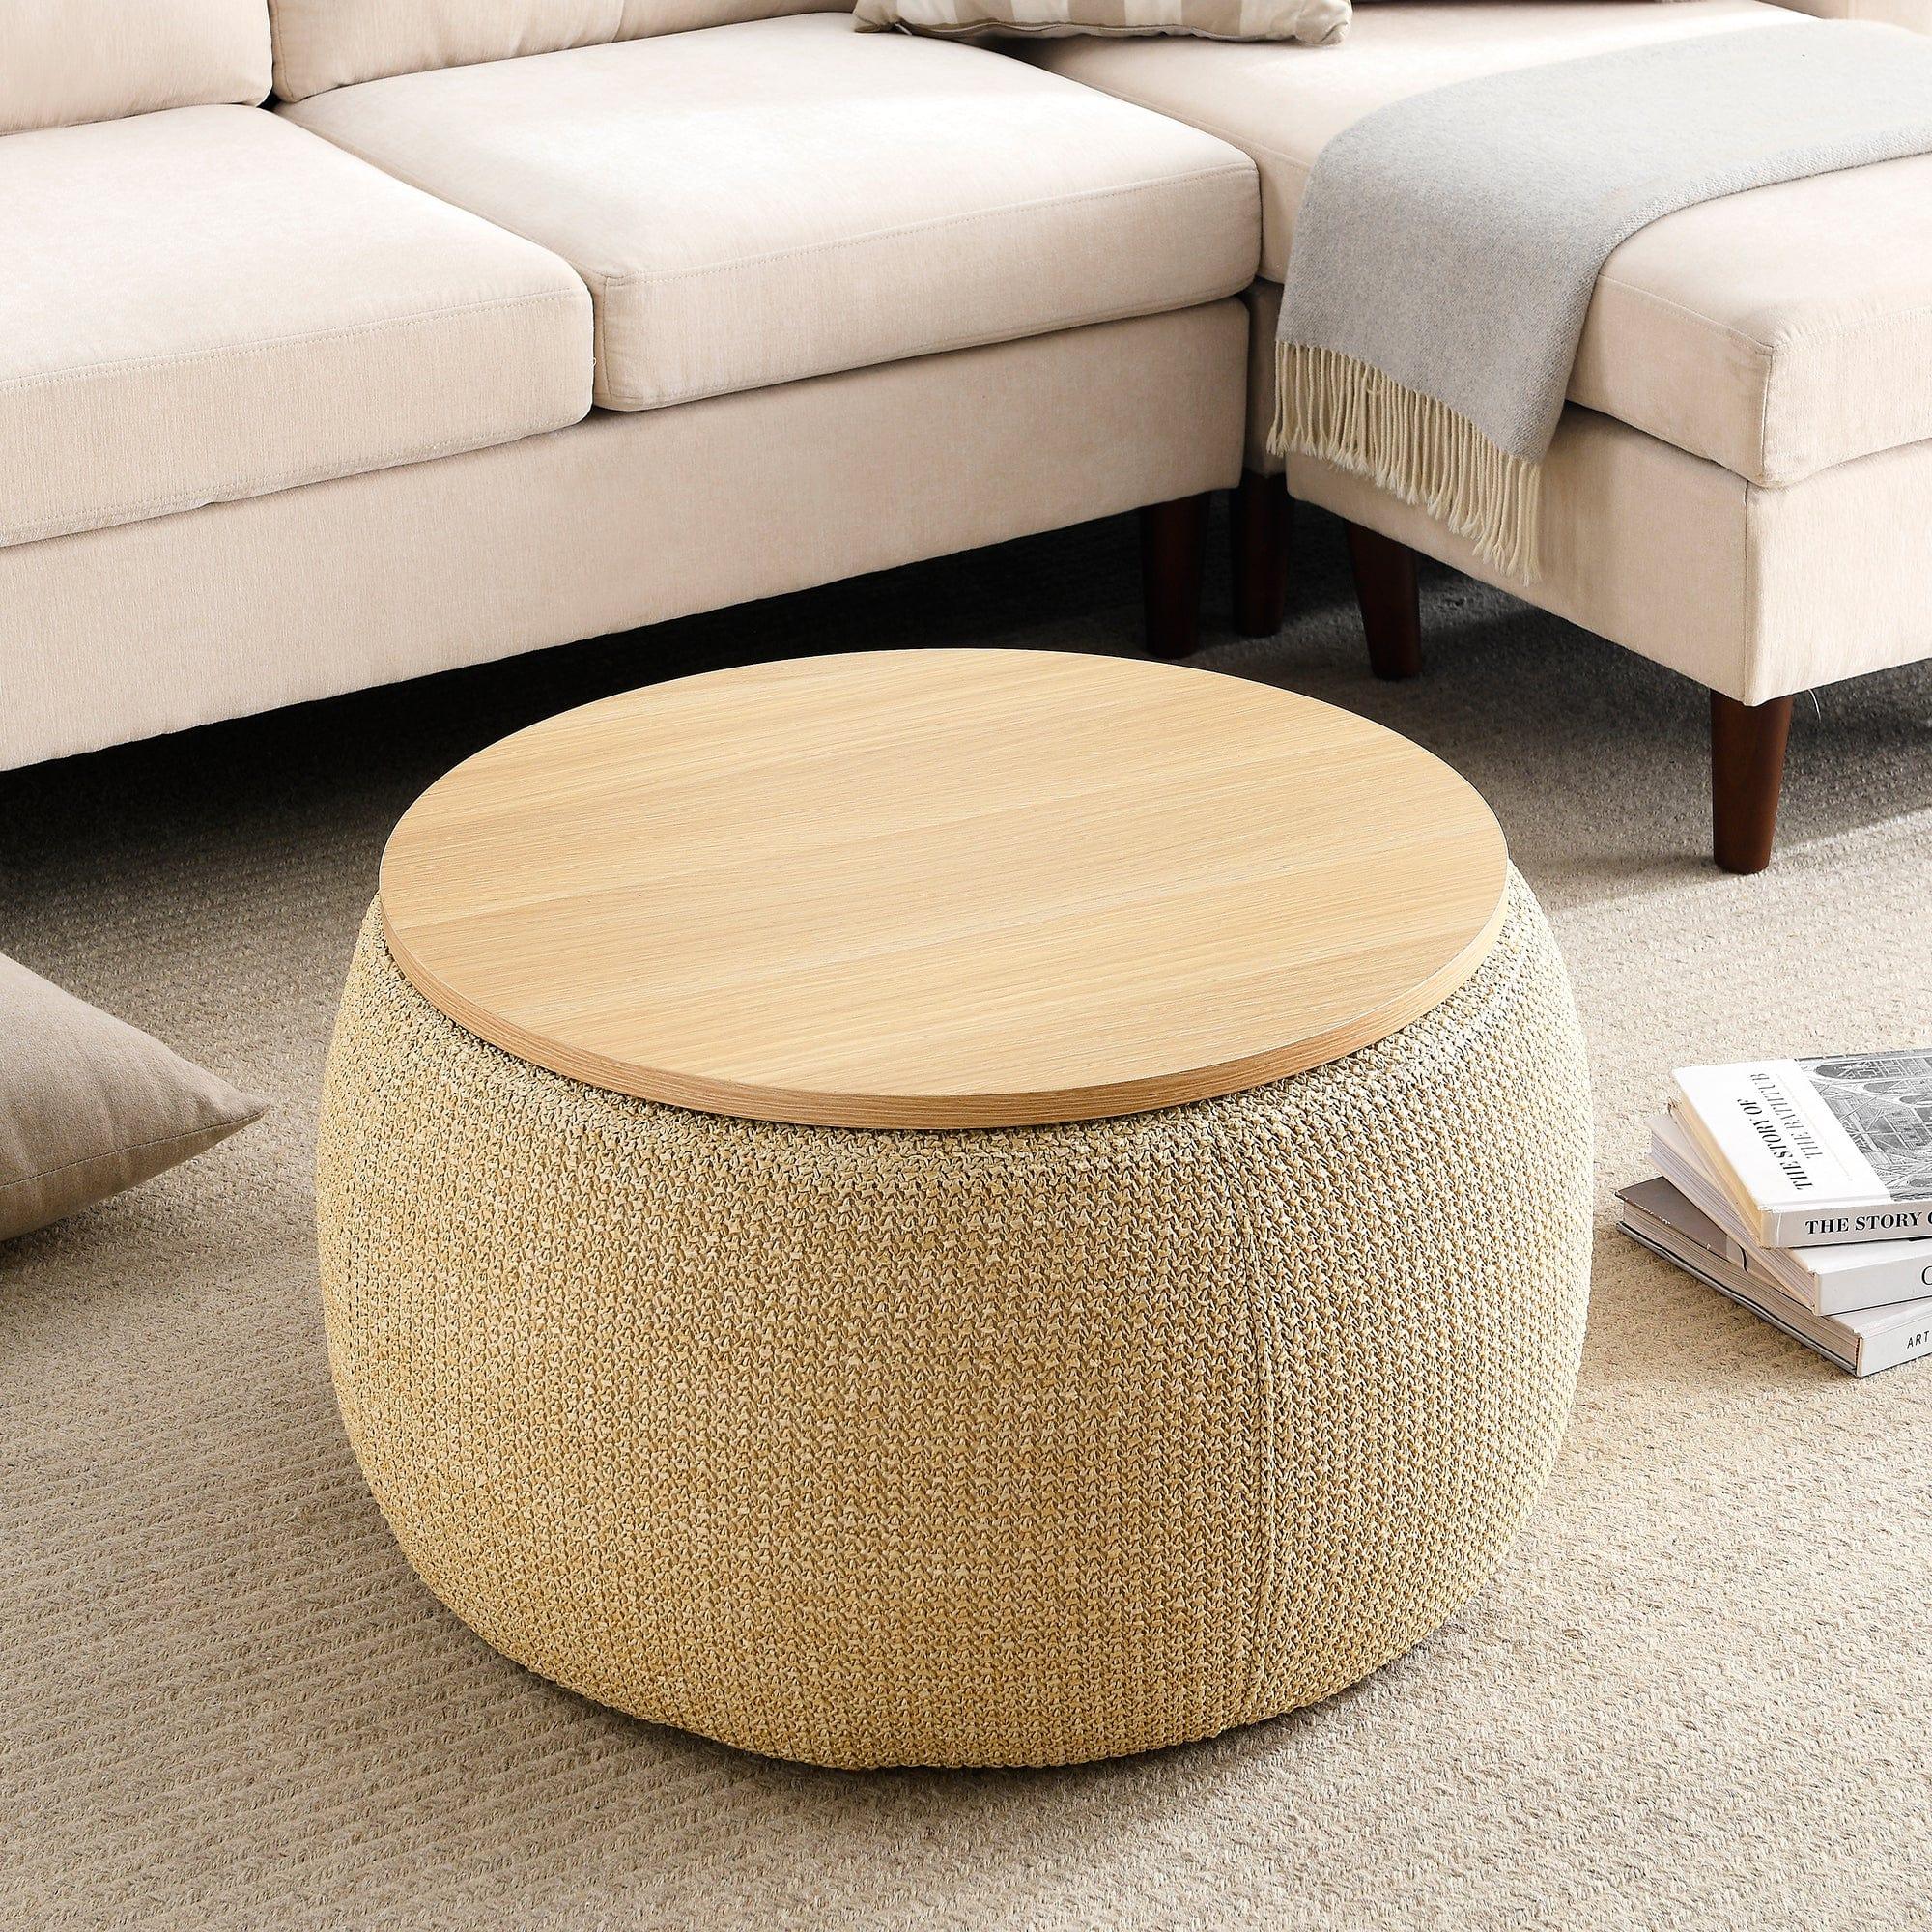 Shop Round Storage Ottoman, 2 in 1 Function, Work as End table and Ottoman, Natural (25.5"x25.5"x14.5") Mademoiselle Home Decor